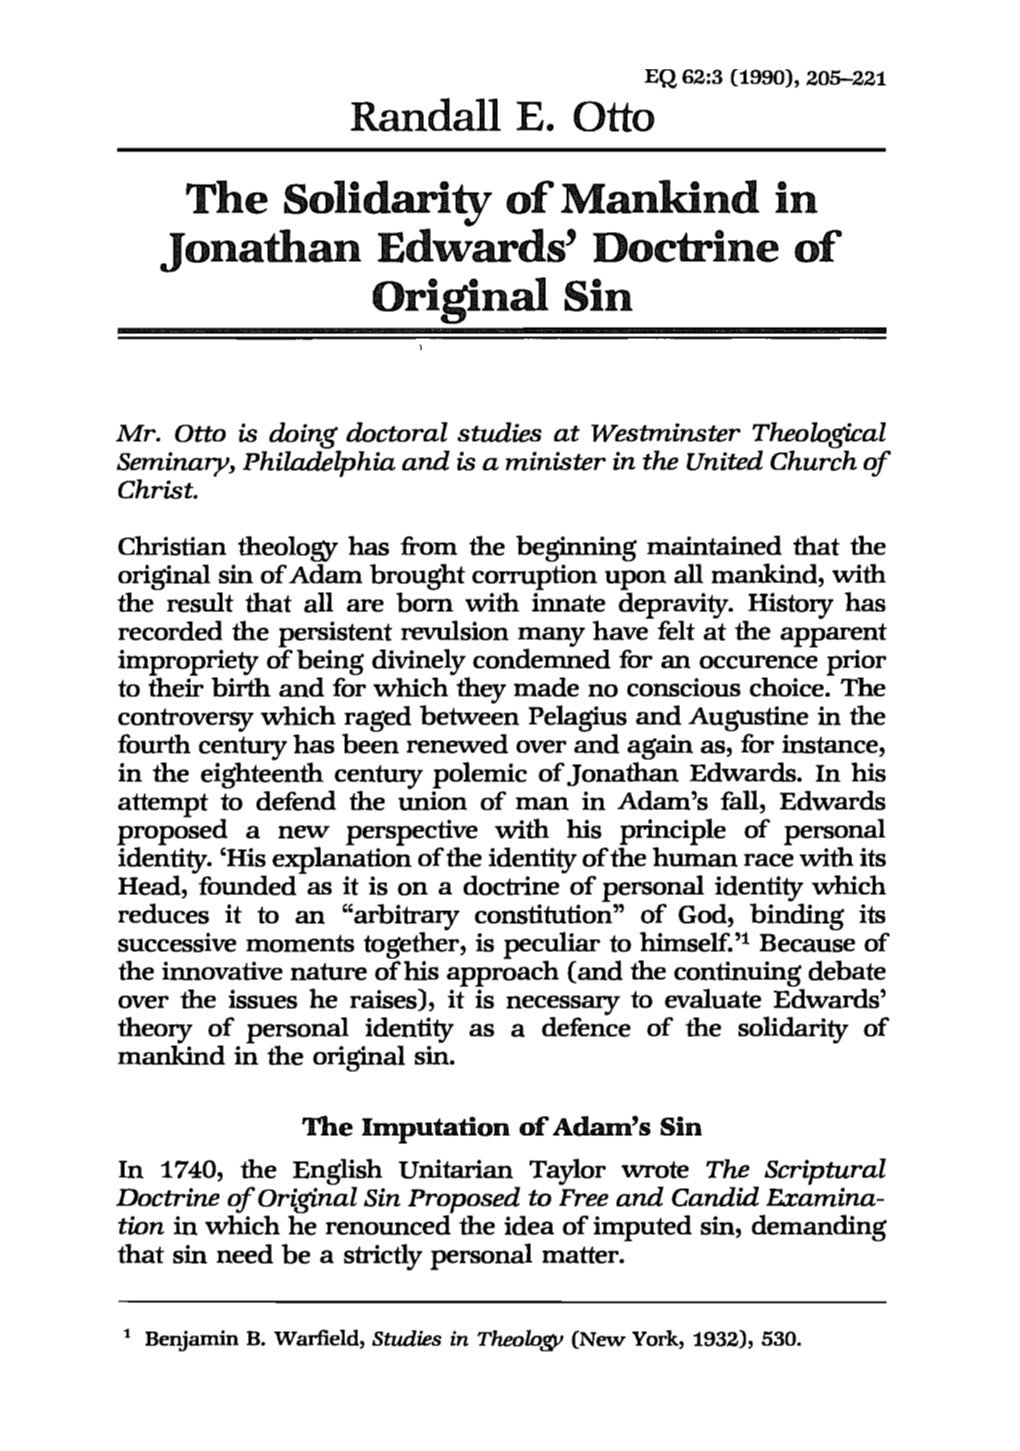 The Solidarity of Mankind in Jonathan Edwards' Doctrine of Original Sin